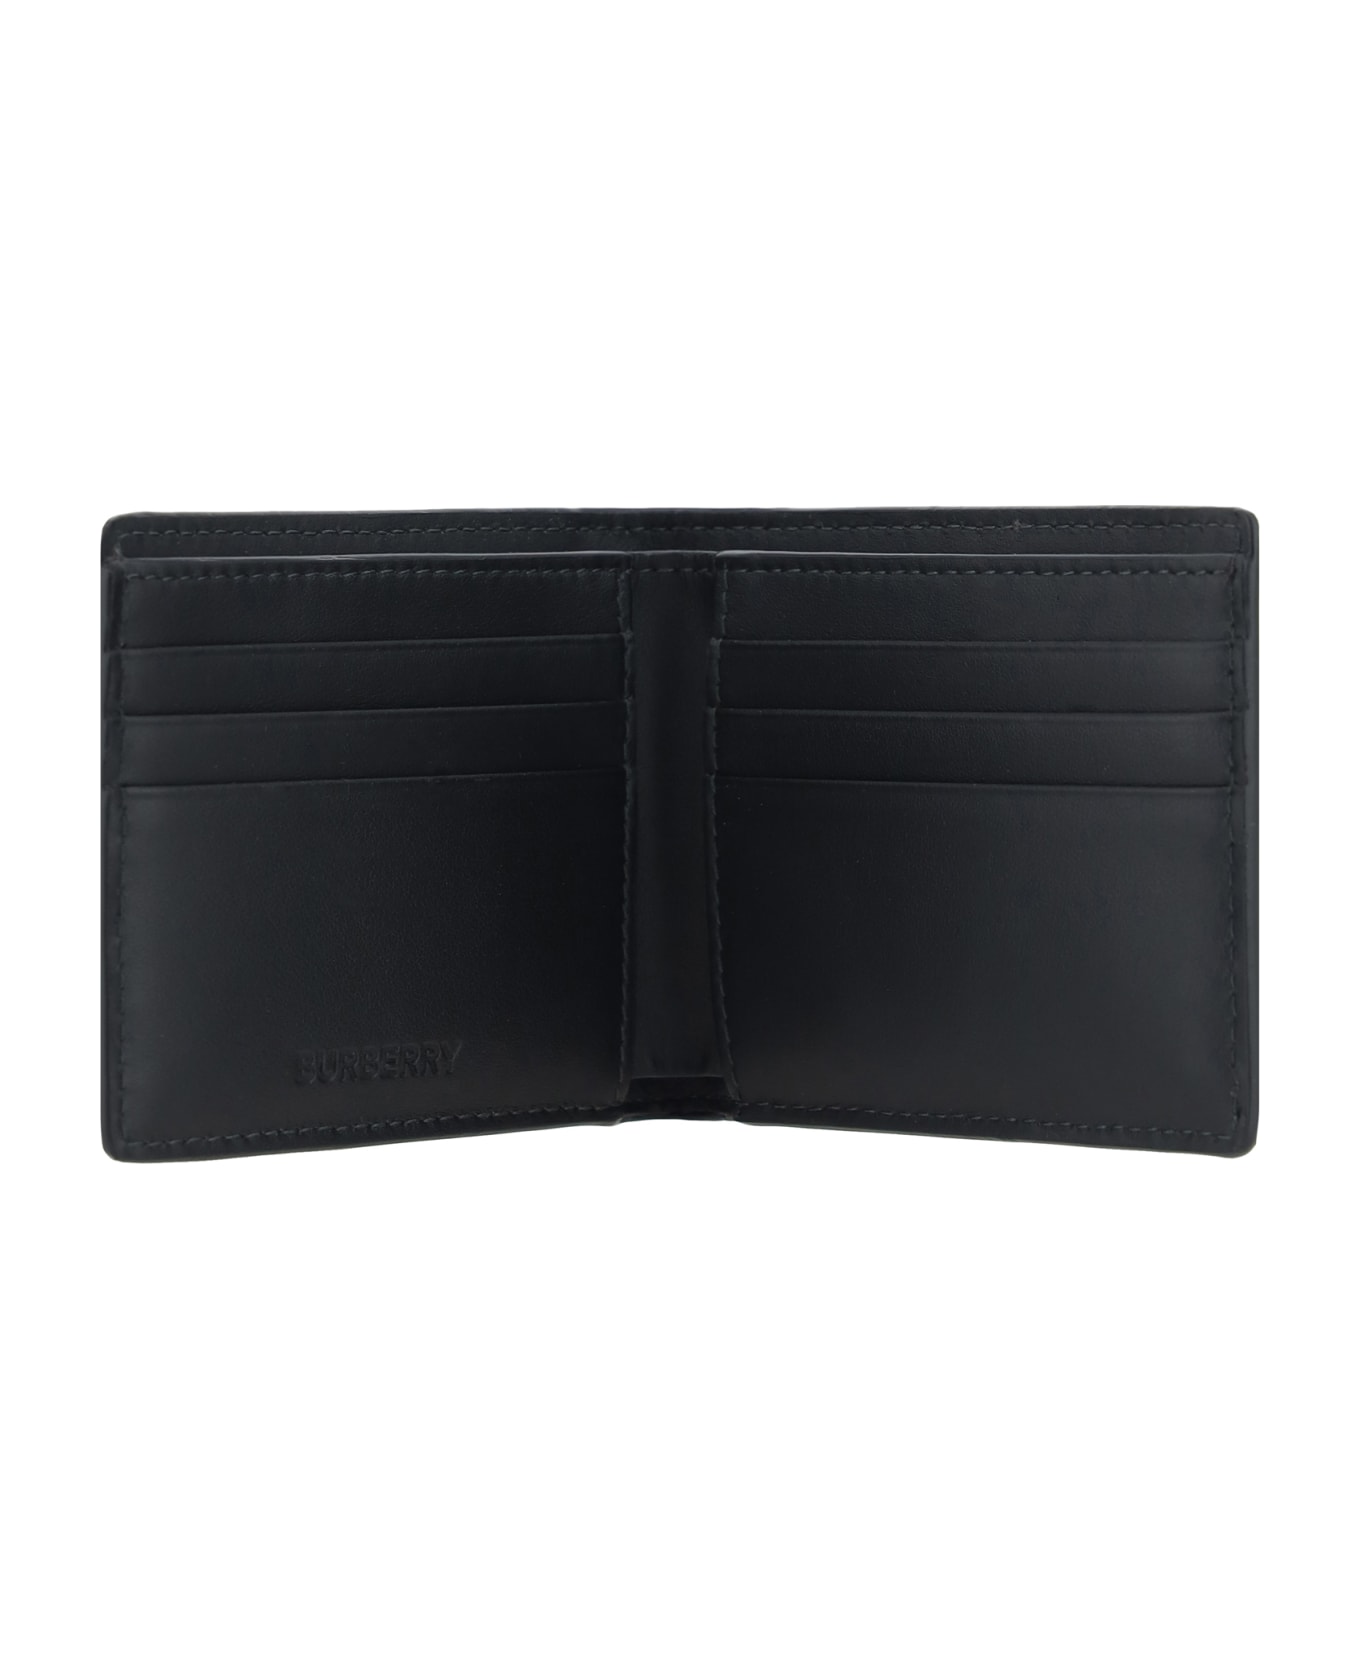 Burberry sole Wallet - Charcoal